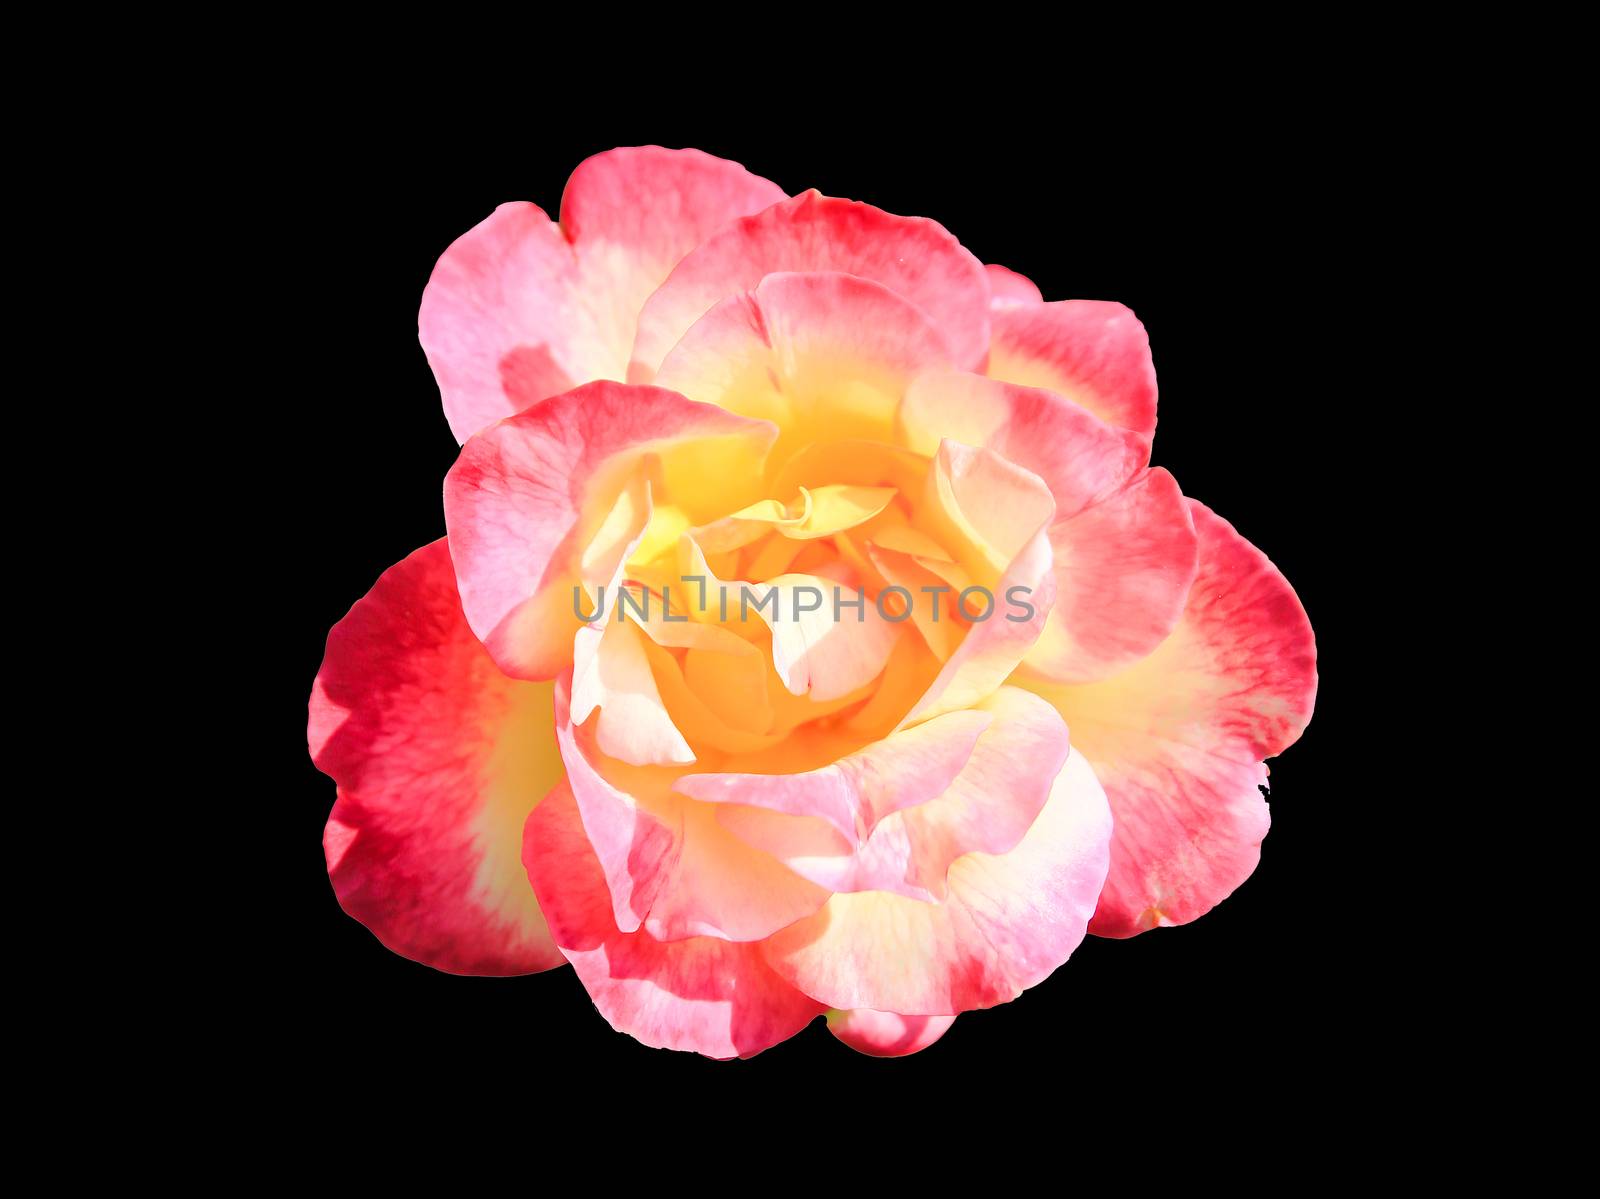 A beautiful pink rose against a black background. Pink roses are a great sign of romance and love